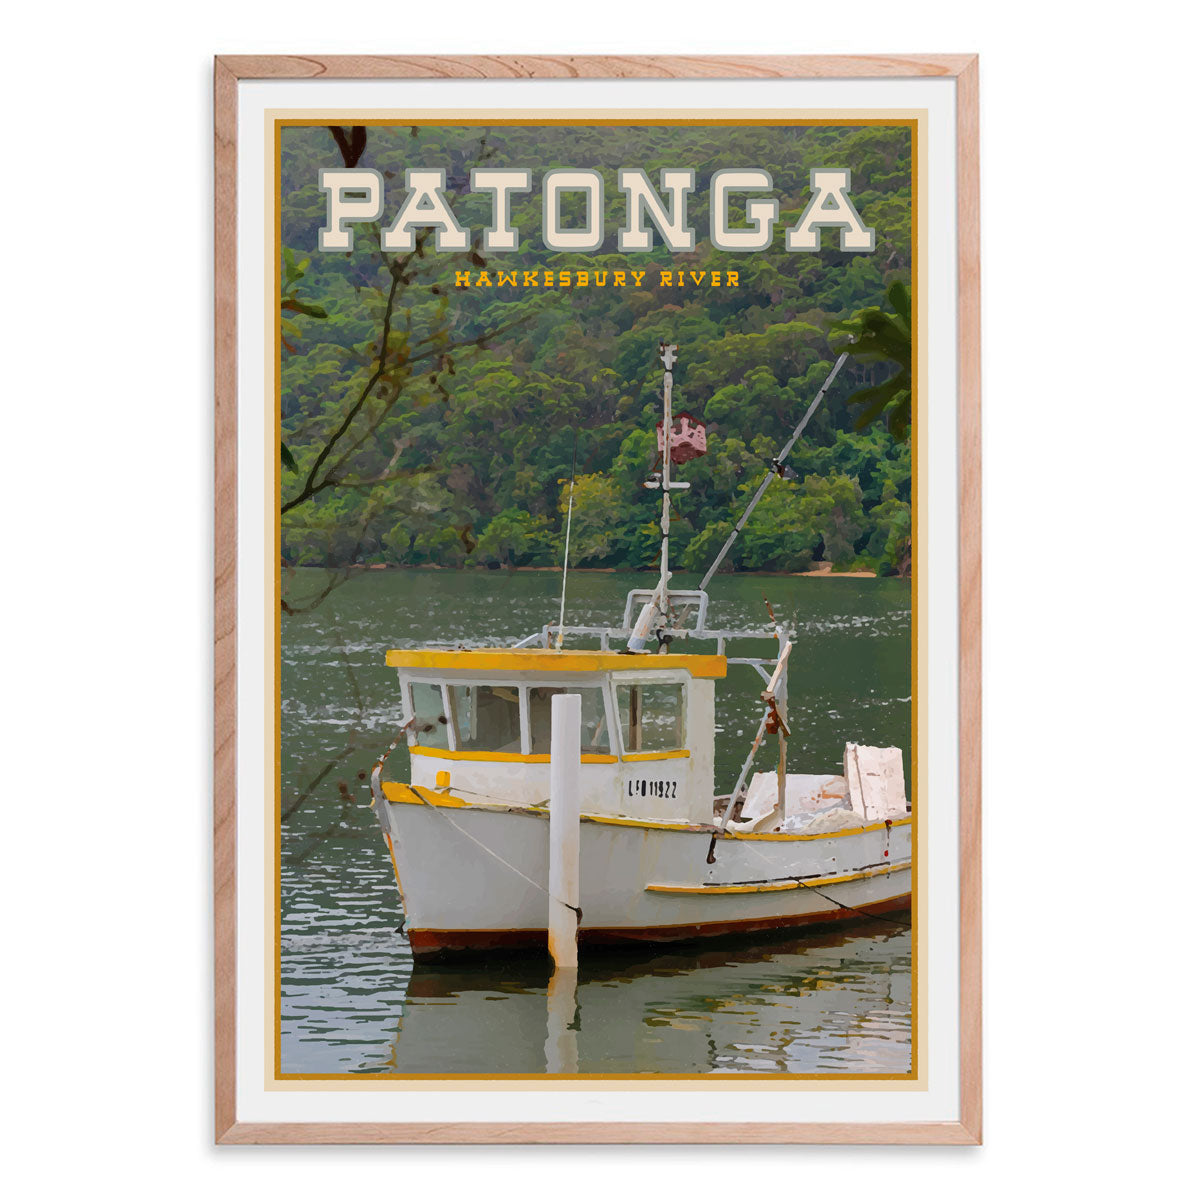 Patonga vintage travel style oak framed print by places we luv